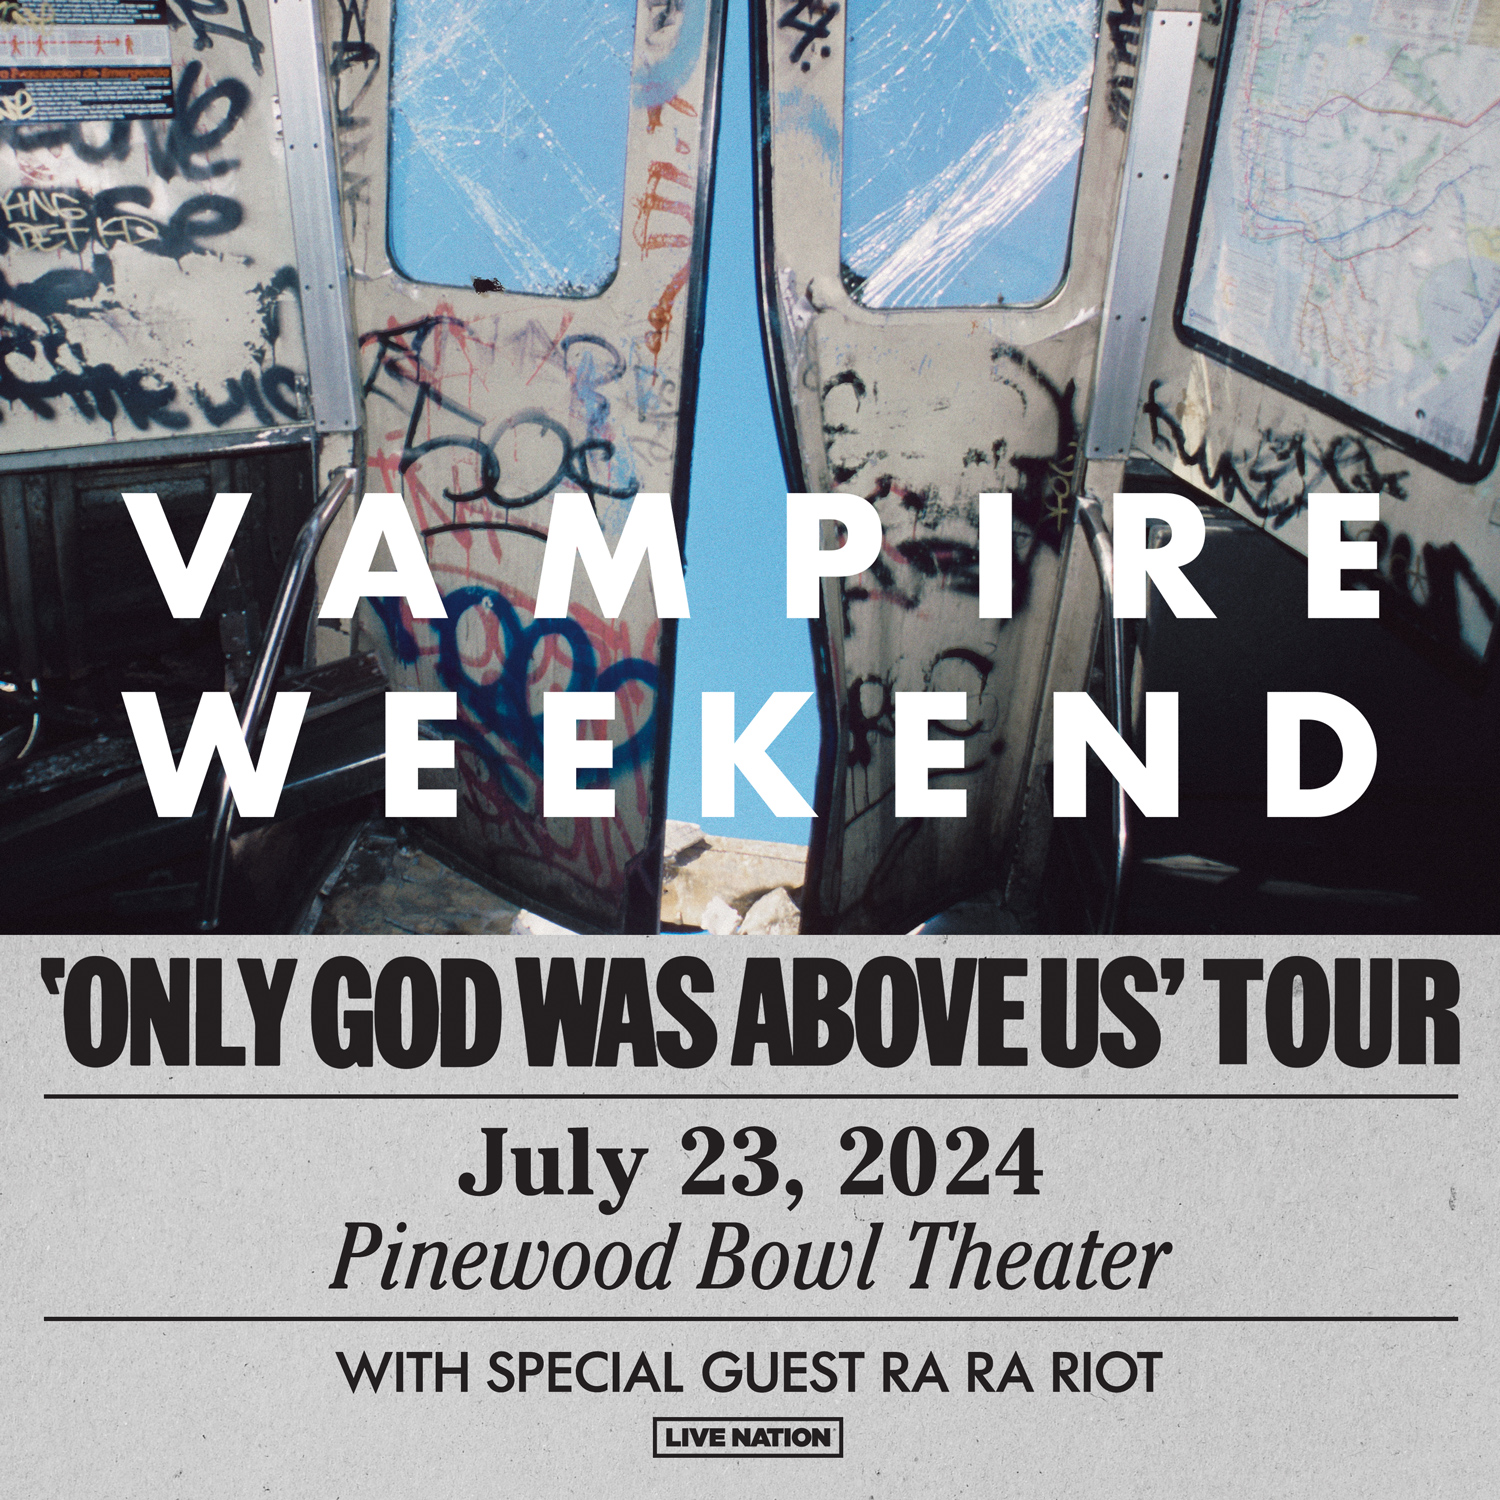 <h1 class="tribe-events-single-event-title">Vampire Weekend</h1>